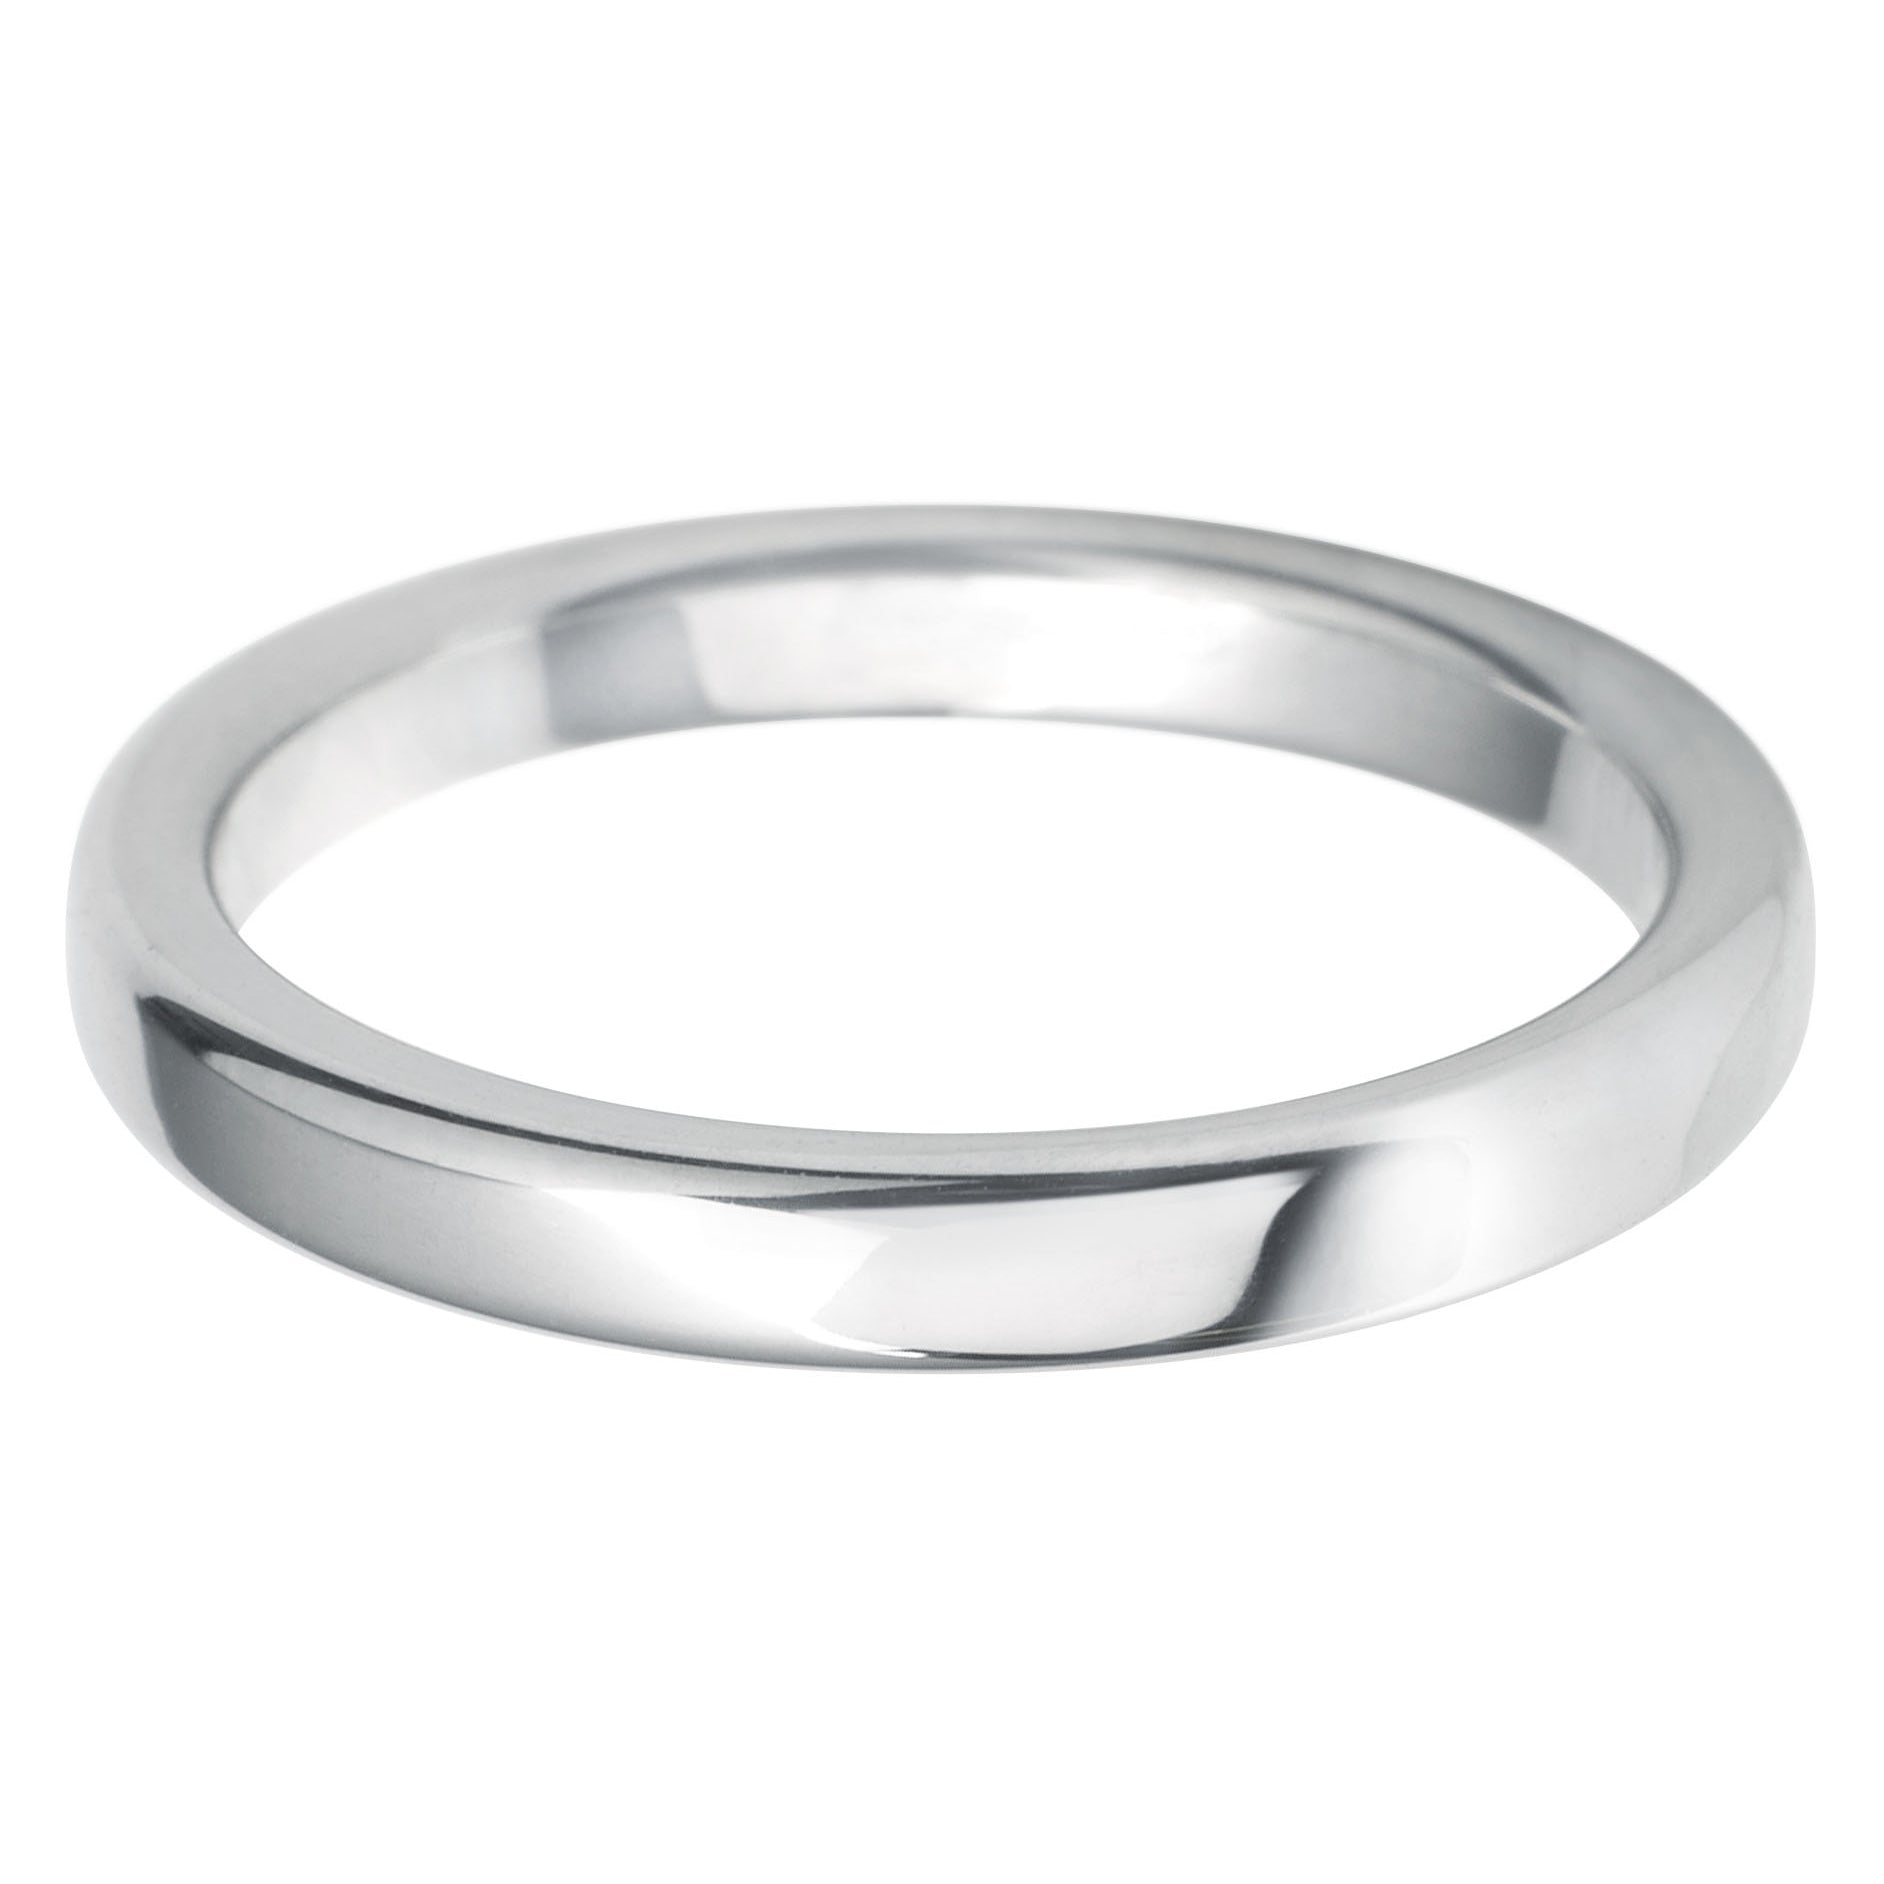 2mm Rounded Flat lightweight Wedding Ring